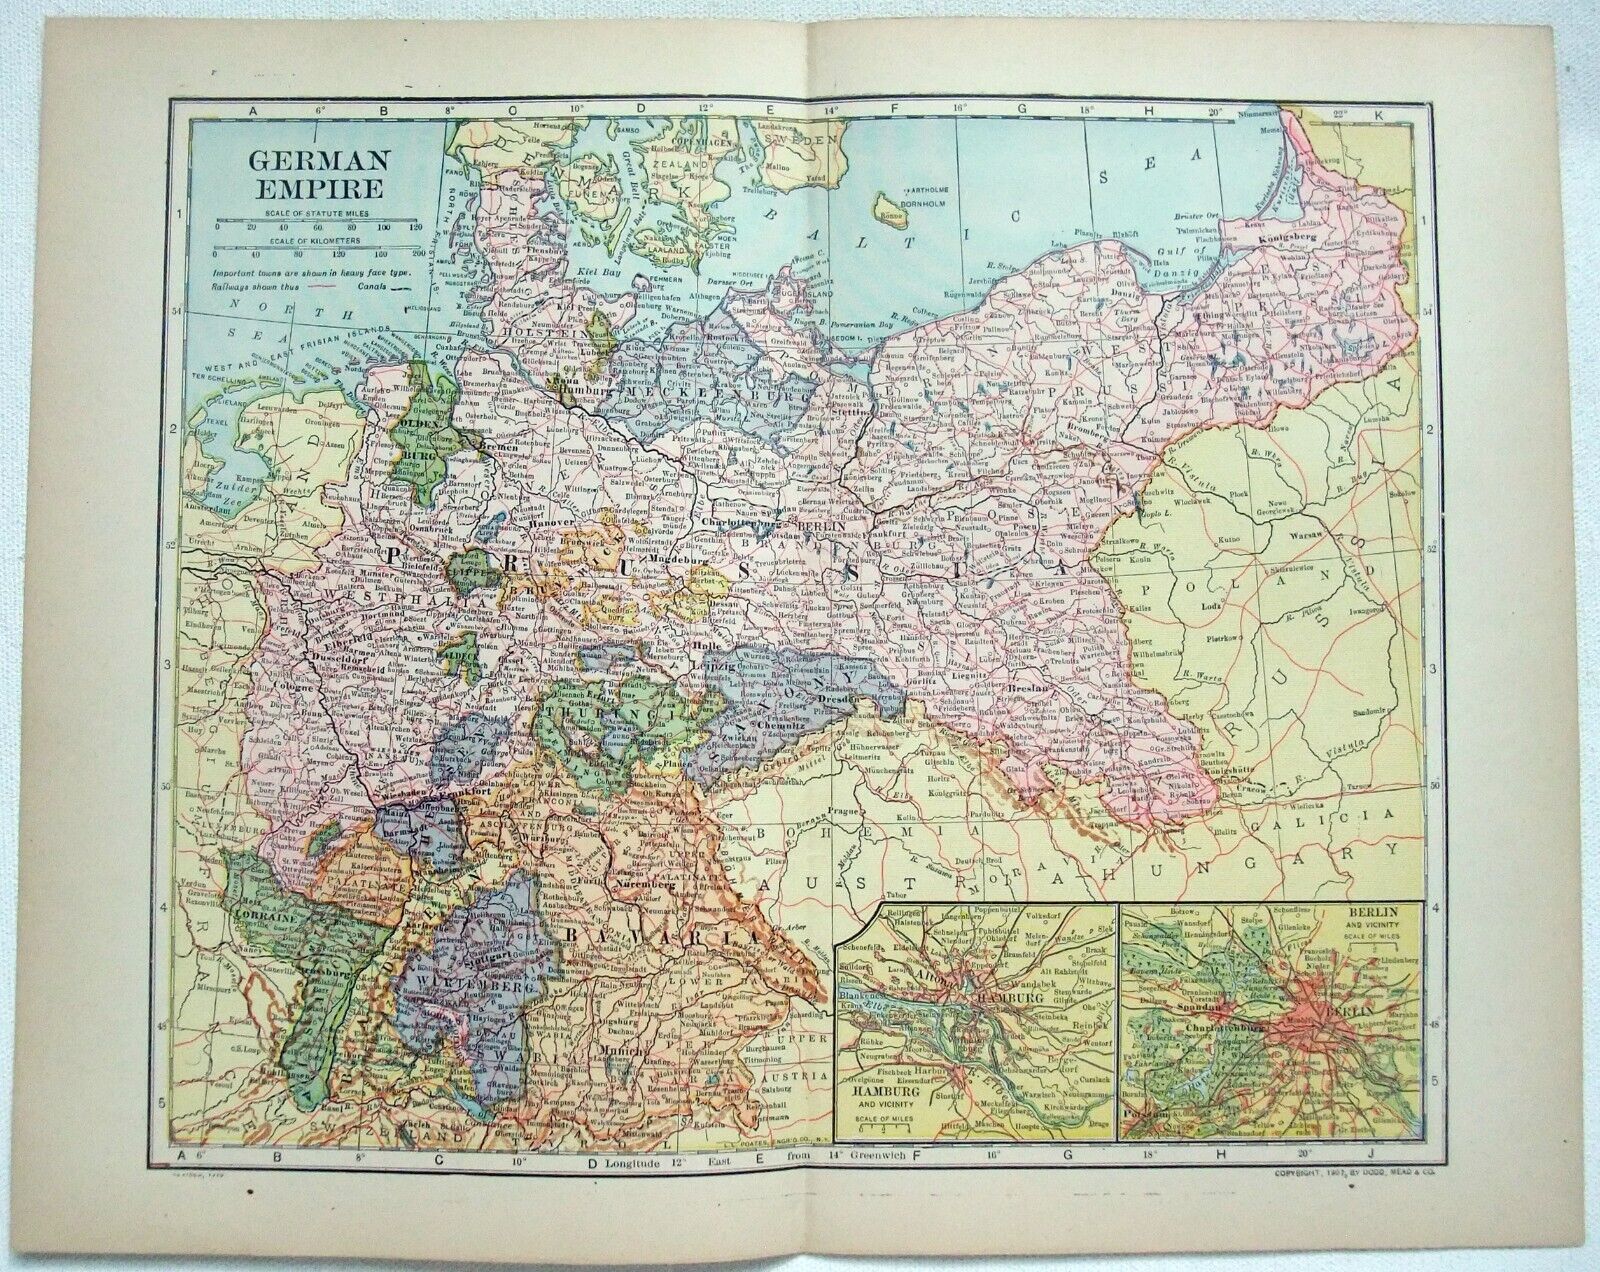 German Empire - Original 1910 Dated Map by Dodd Mead & Company. Antique